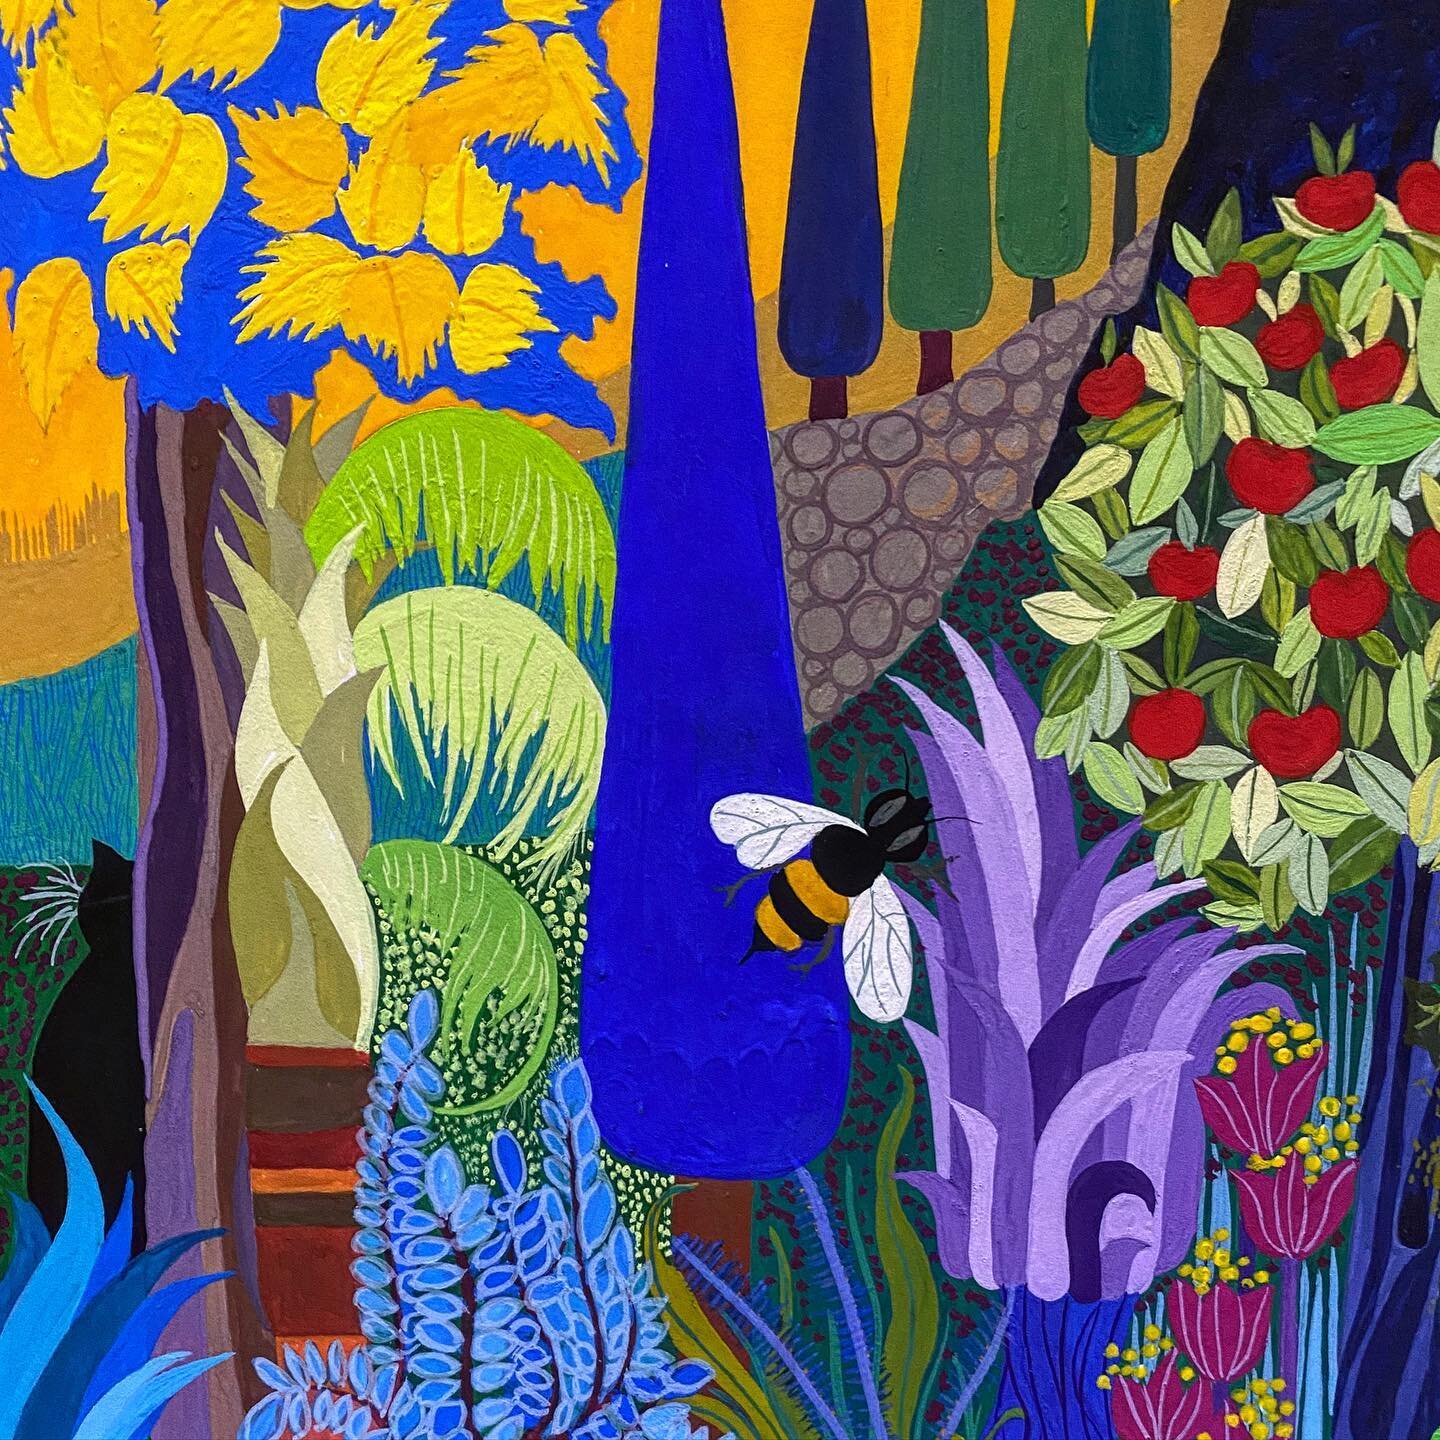 Spring is almost right around the corner! Here&rsquo;s a detail of Jean&rsquo;s illustration inspired by our Umbrian garden &ldquo;jungle&rdquo;!😁🐝 

#JeanTori #artist #garden #art #artwork #illustration #illustrator #gouachepaint #colourtheory #fi